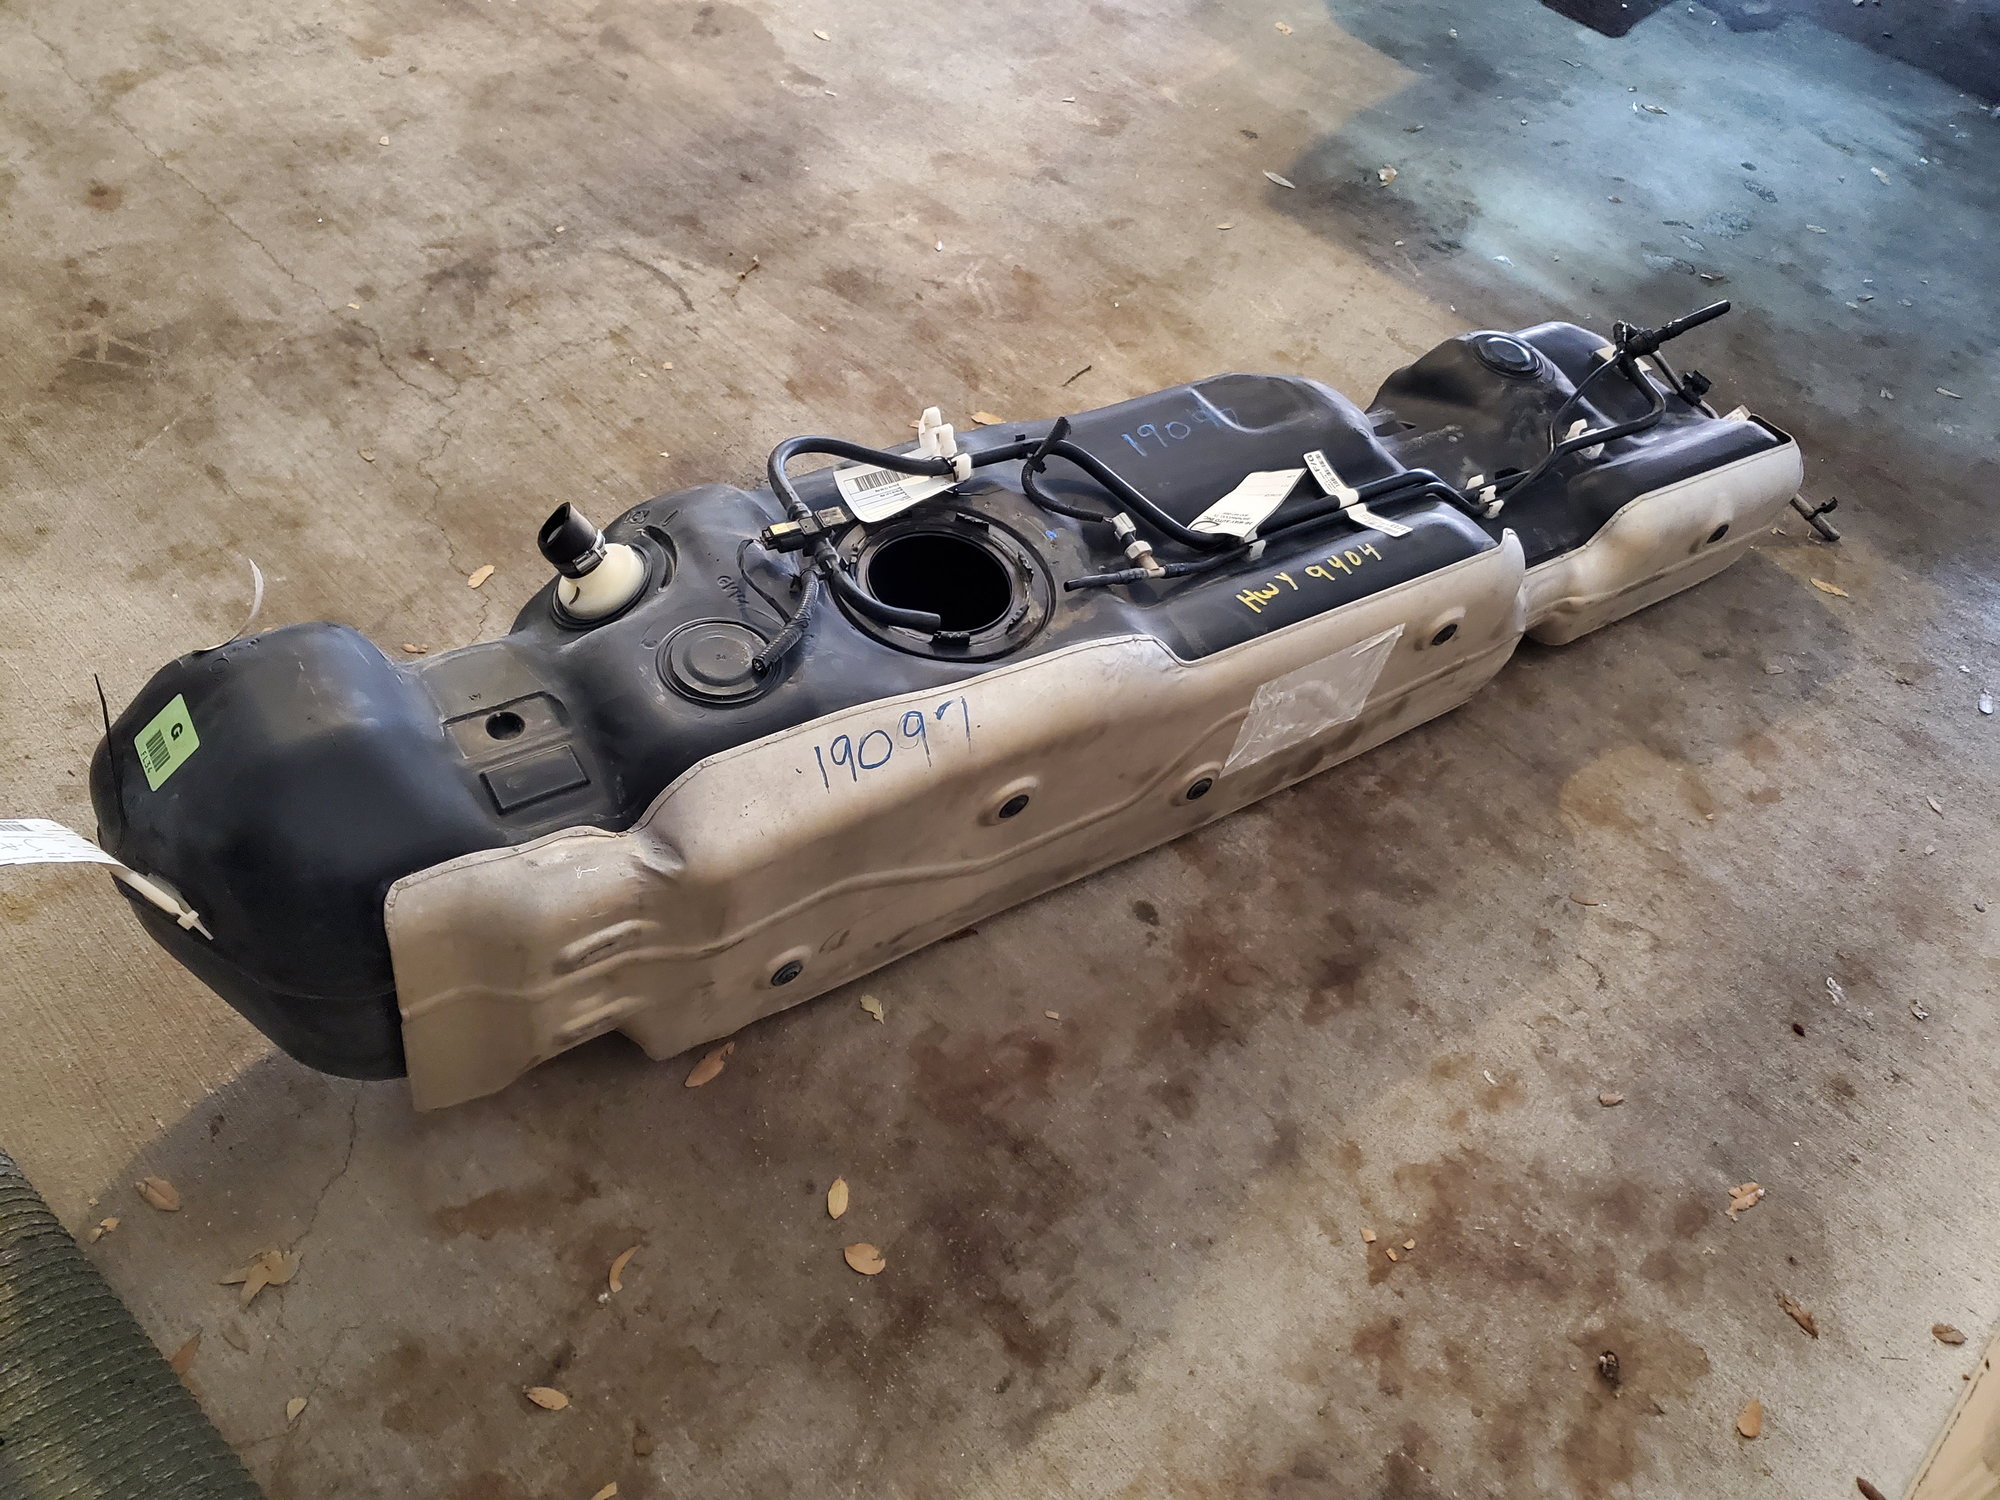 36 Gallon Tank Swap! - Ford F150 Forum - Community of Ford Truck Fans 2015 Ford F150 36 Gallon Fuel Tank